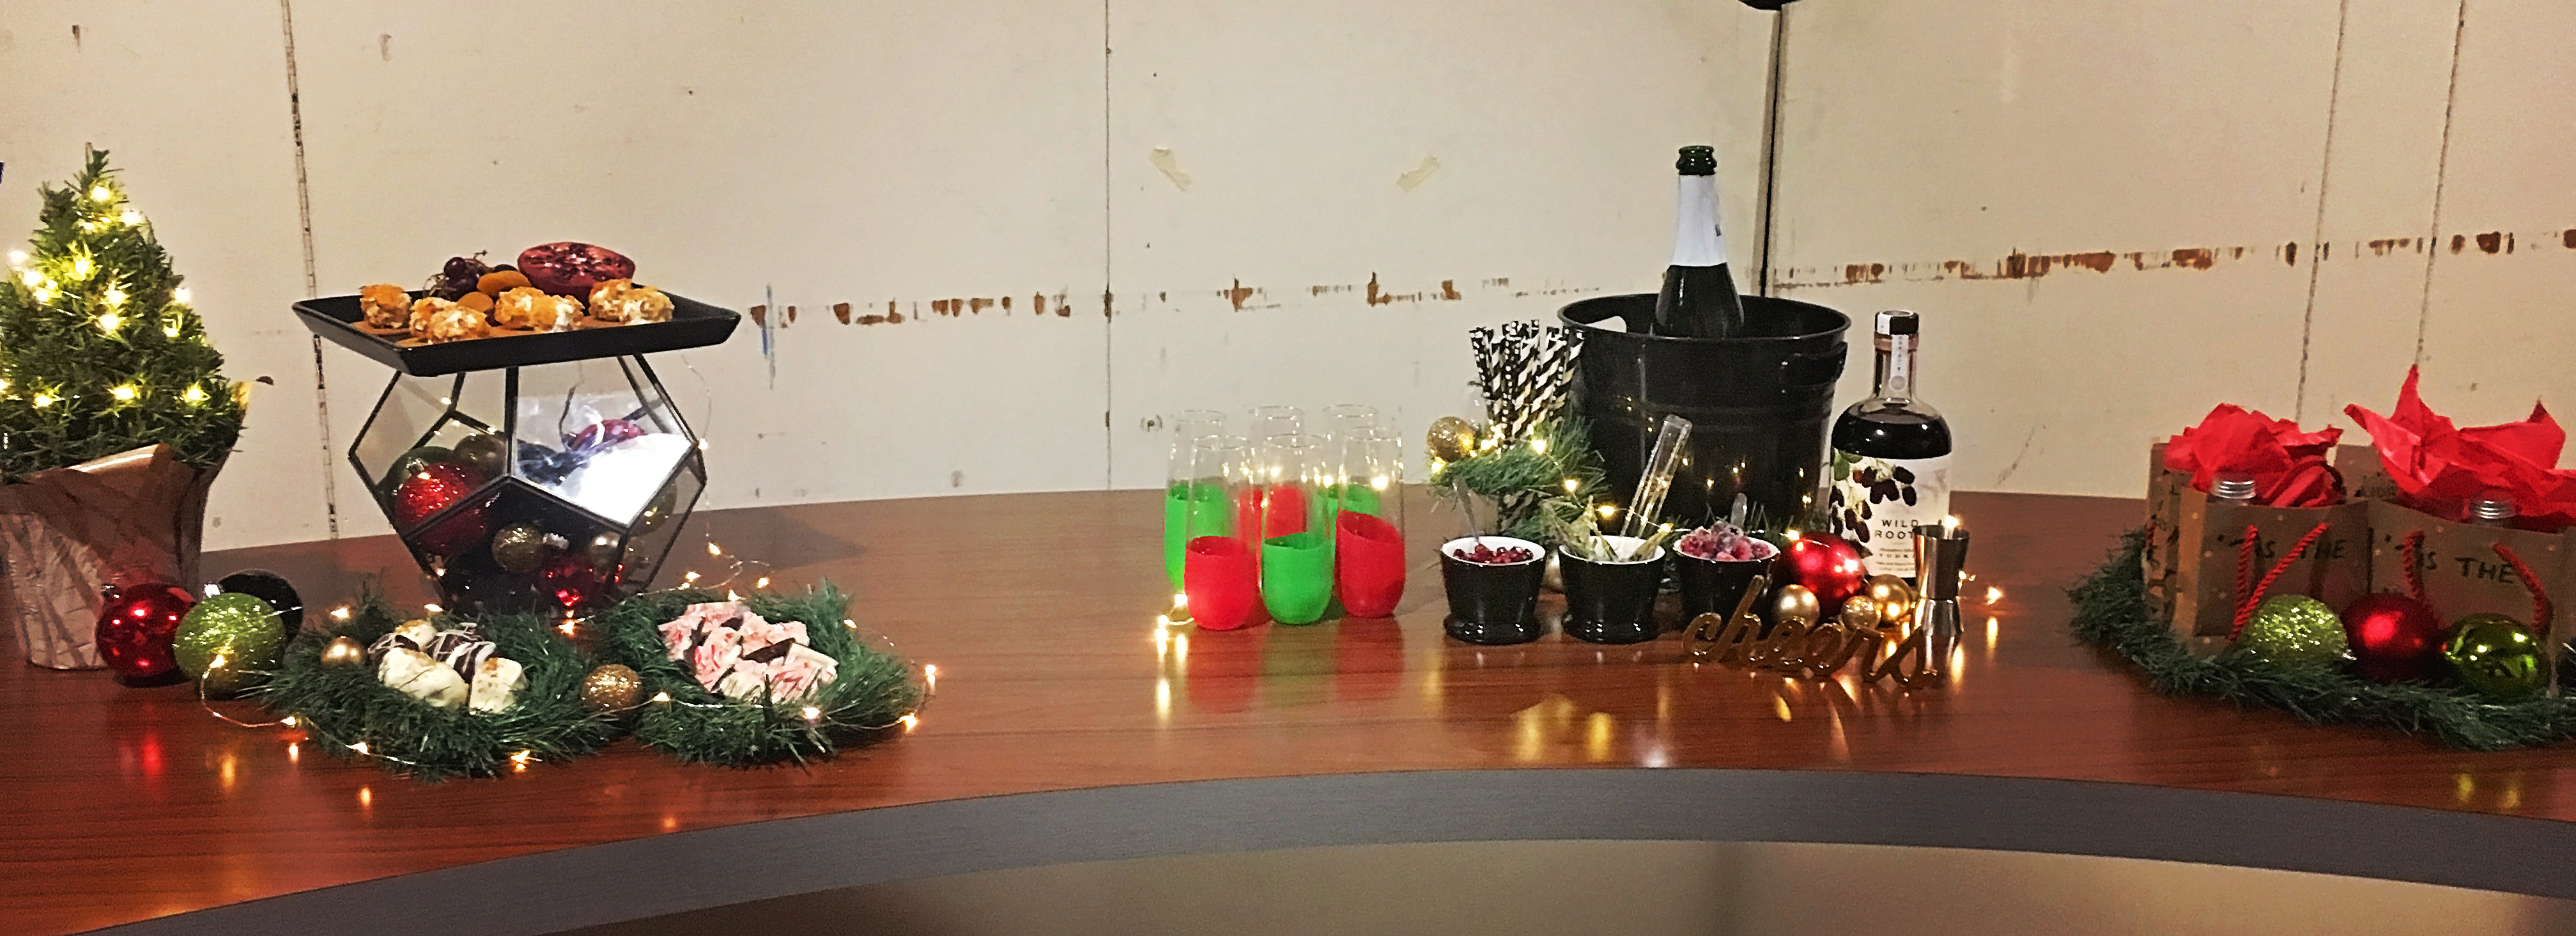 Holiday Party Decor Tips - Behind the Scenes at KATU - A Well Crafted Party